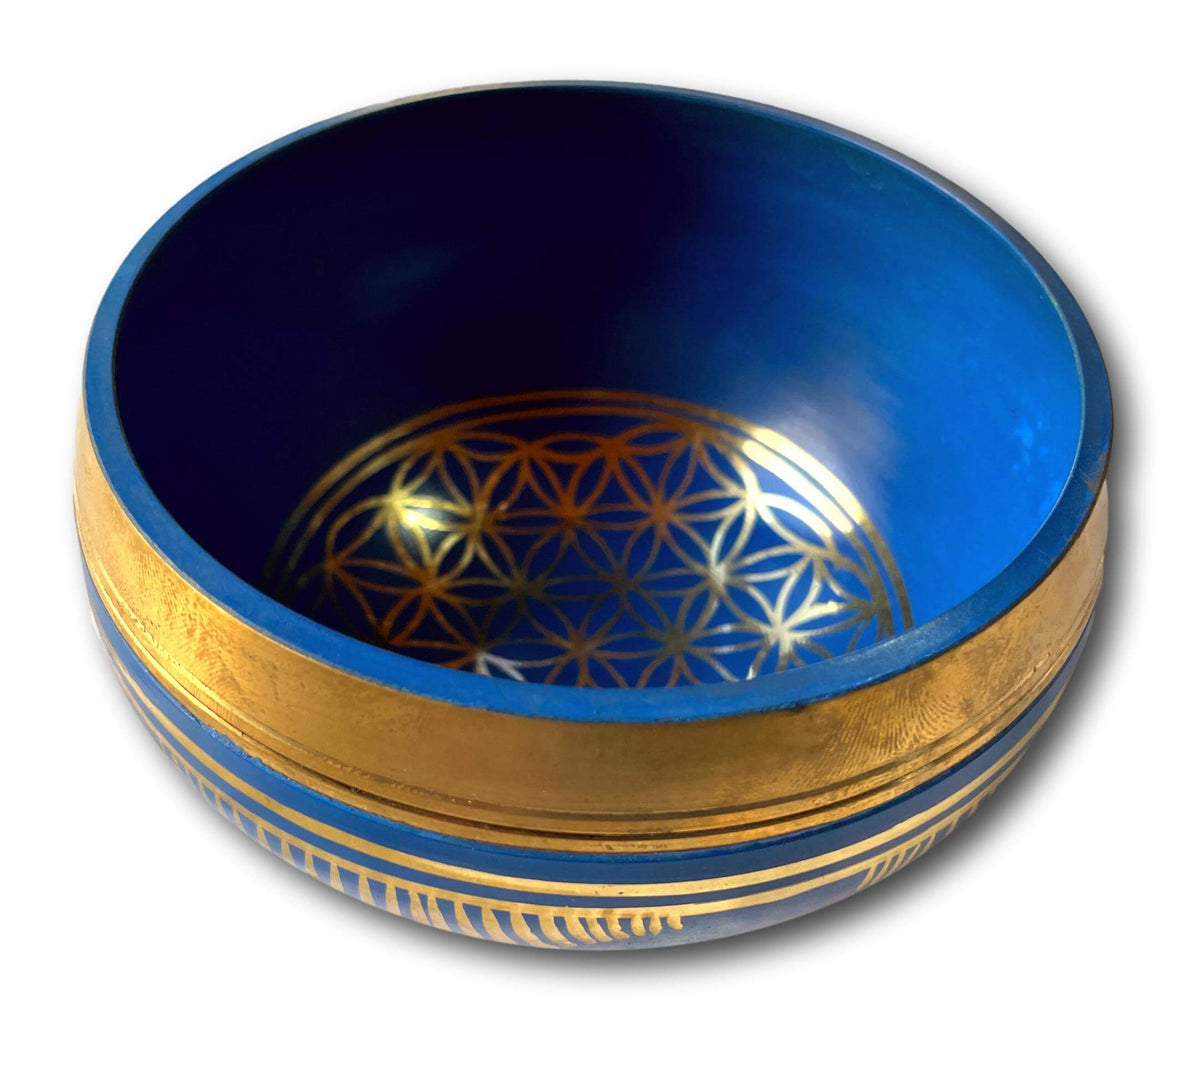 BLUE FLOWER OF LIFE GENUINE NEPALESE SINGING BOWL - MADE IN NEPAL (B4 NOTE CROWN CHAKRA) + SINGING BOWLS AND MEDITATION